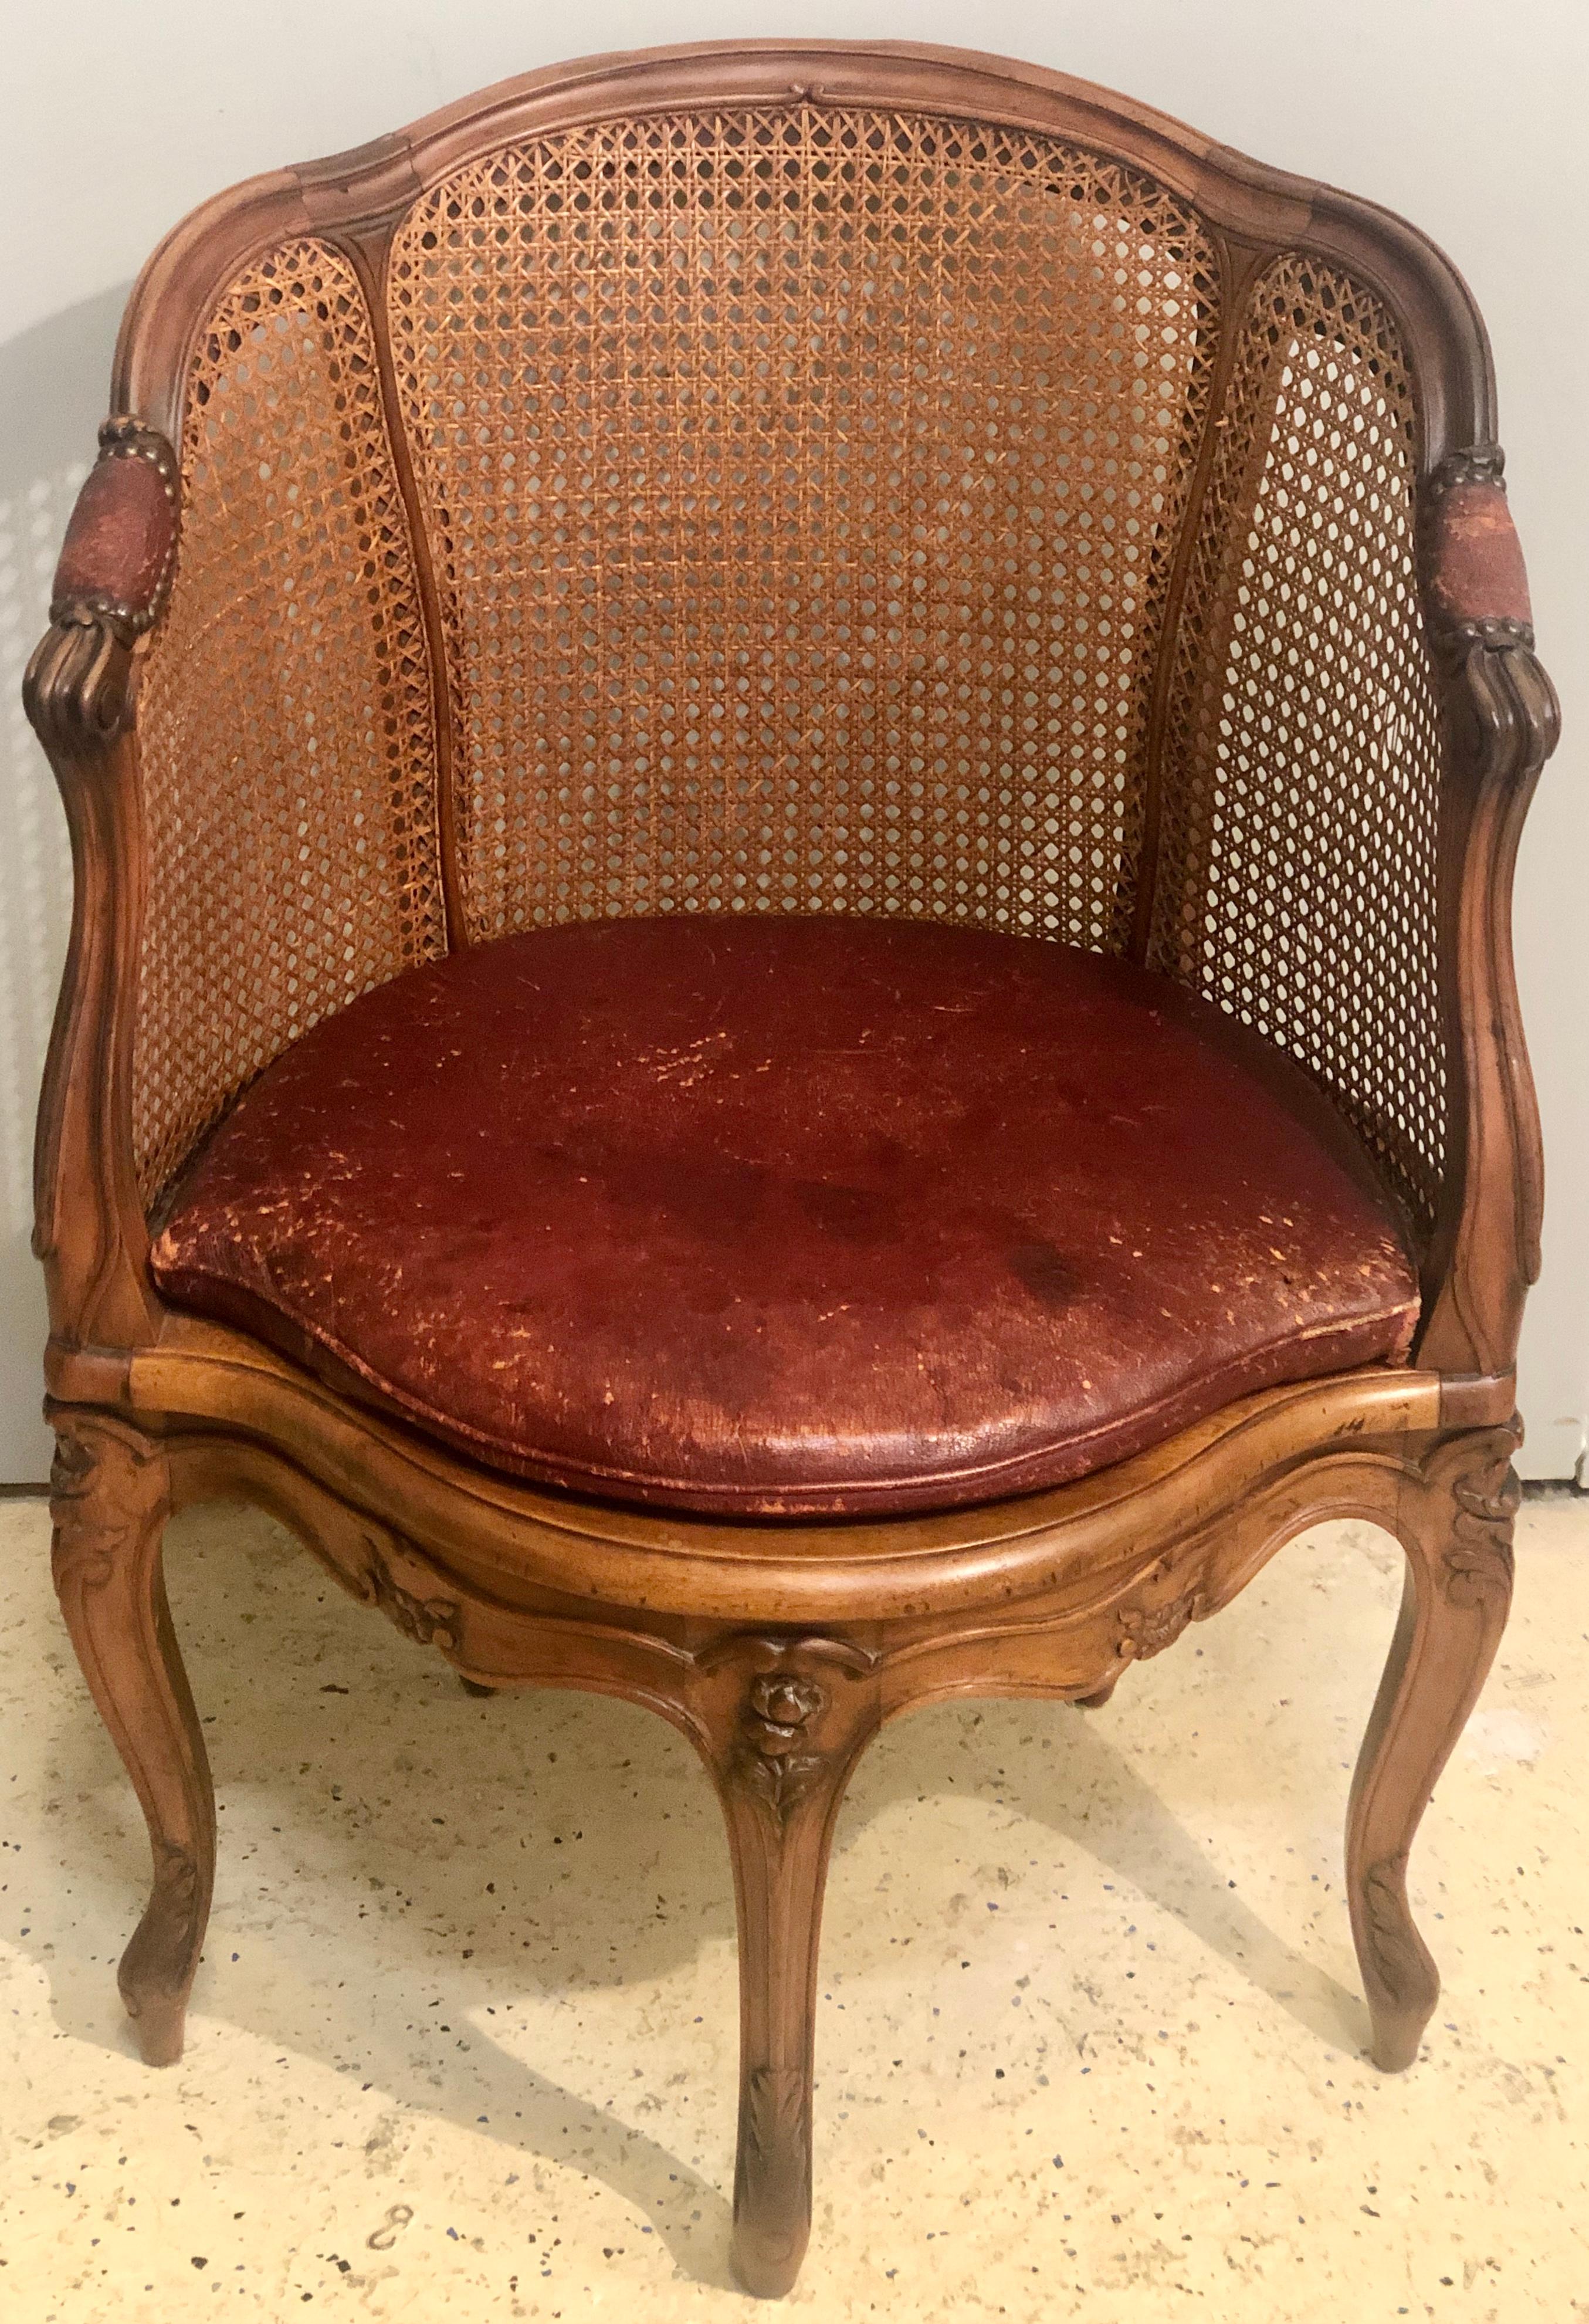 18th century French caned bergère de Bureau. A Louie XV beechwood bergère de Bureau with leather squab cushion, circa 1740. Magnificently carved. One of two presently available.

Please see:
Sale #18793
The collector: Property from Four American